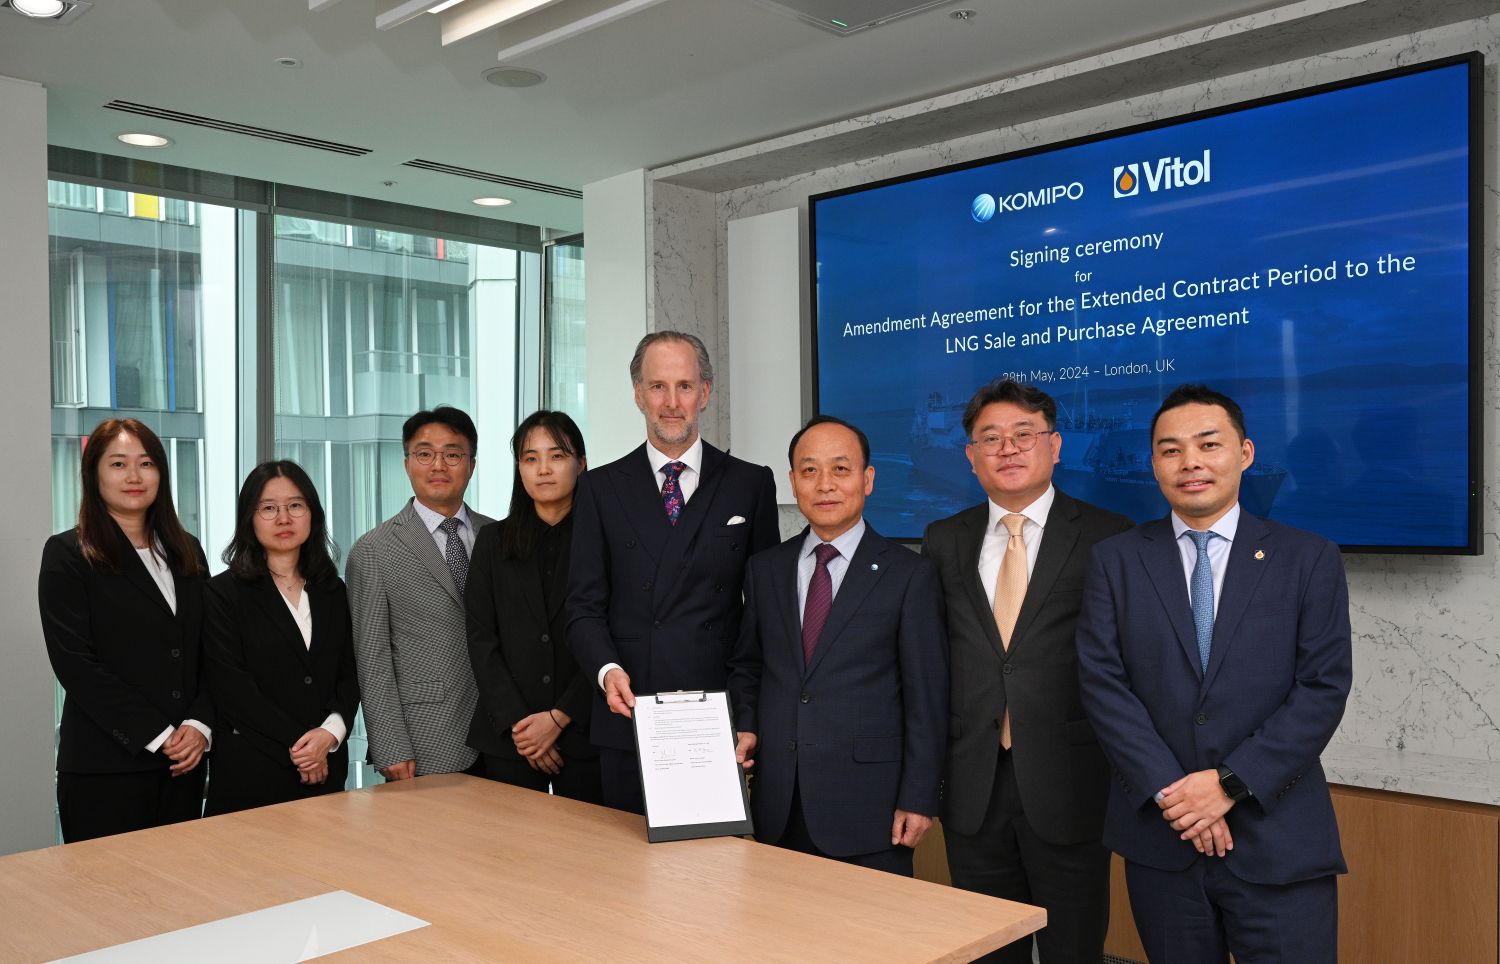 Vitol extends long-term LNG supply contract with KOMIPO